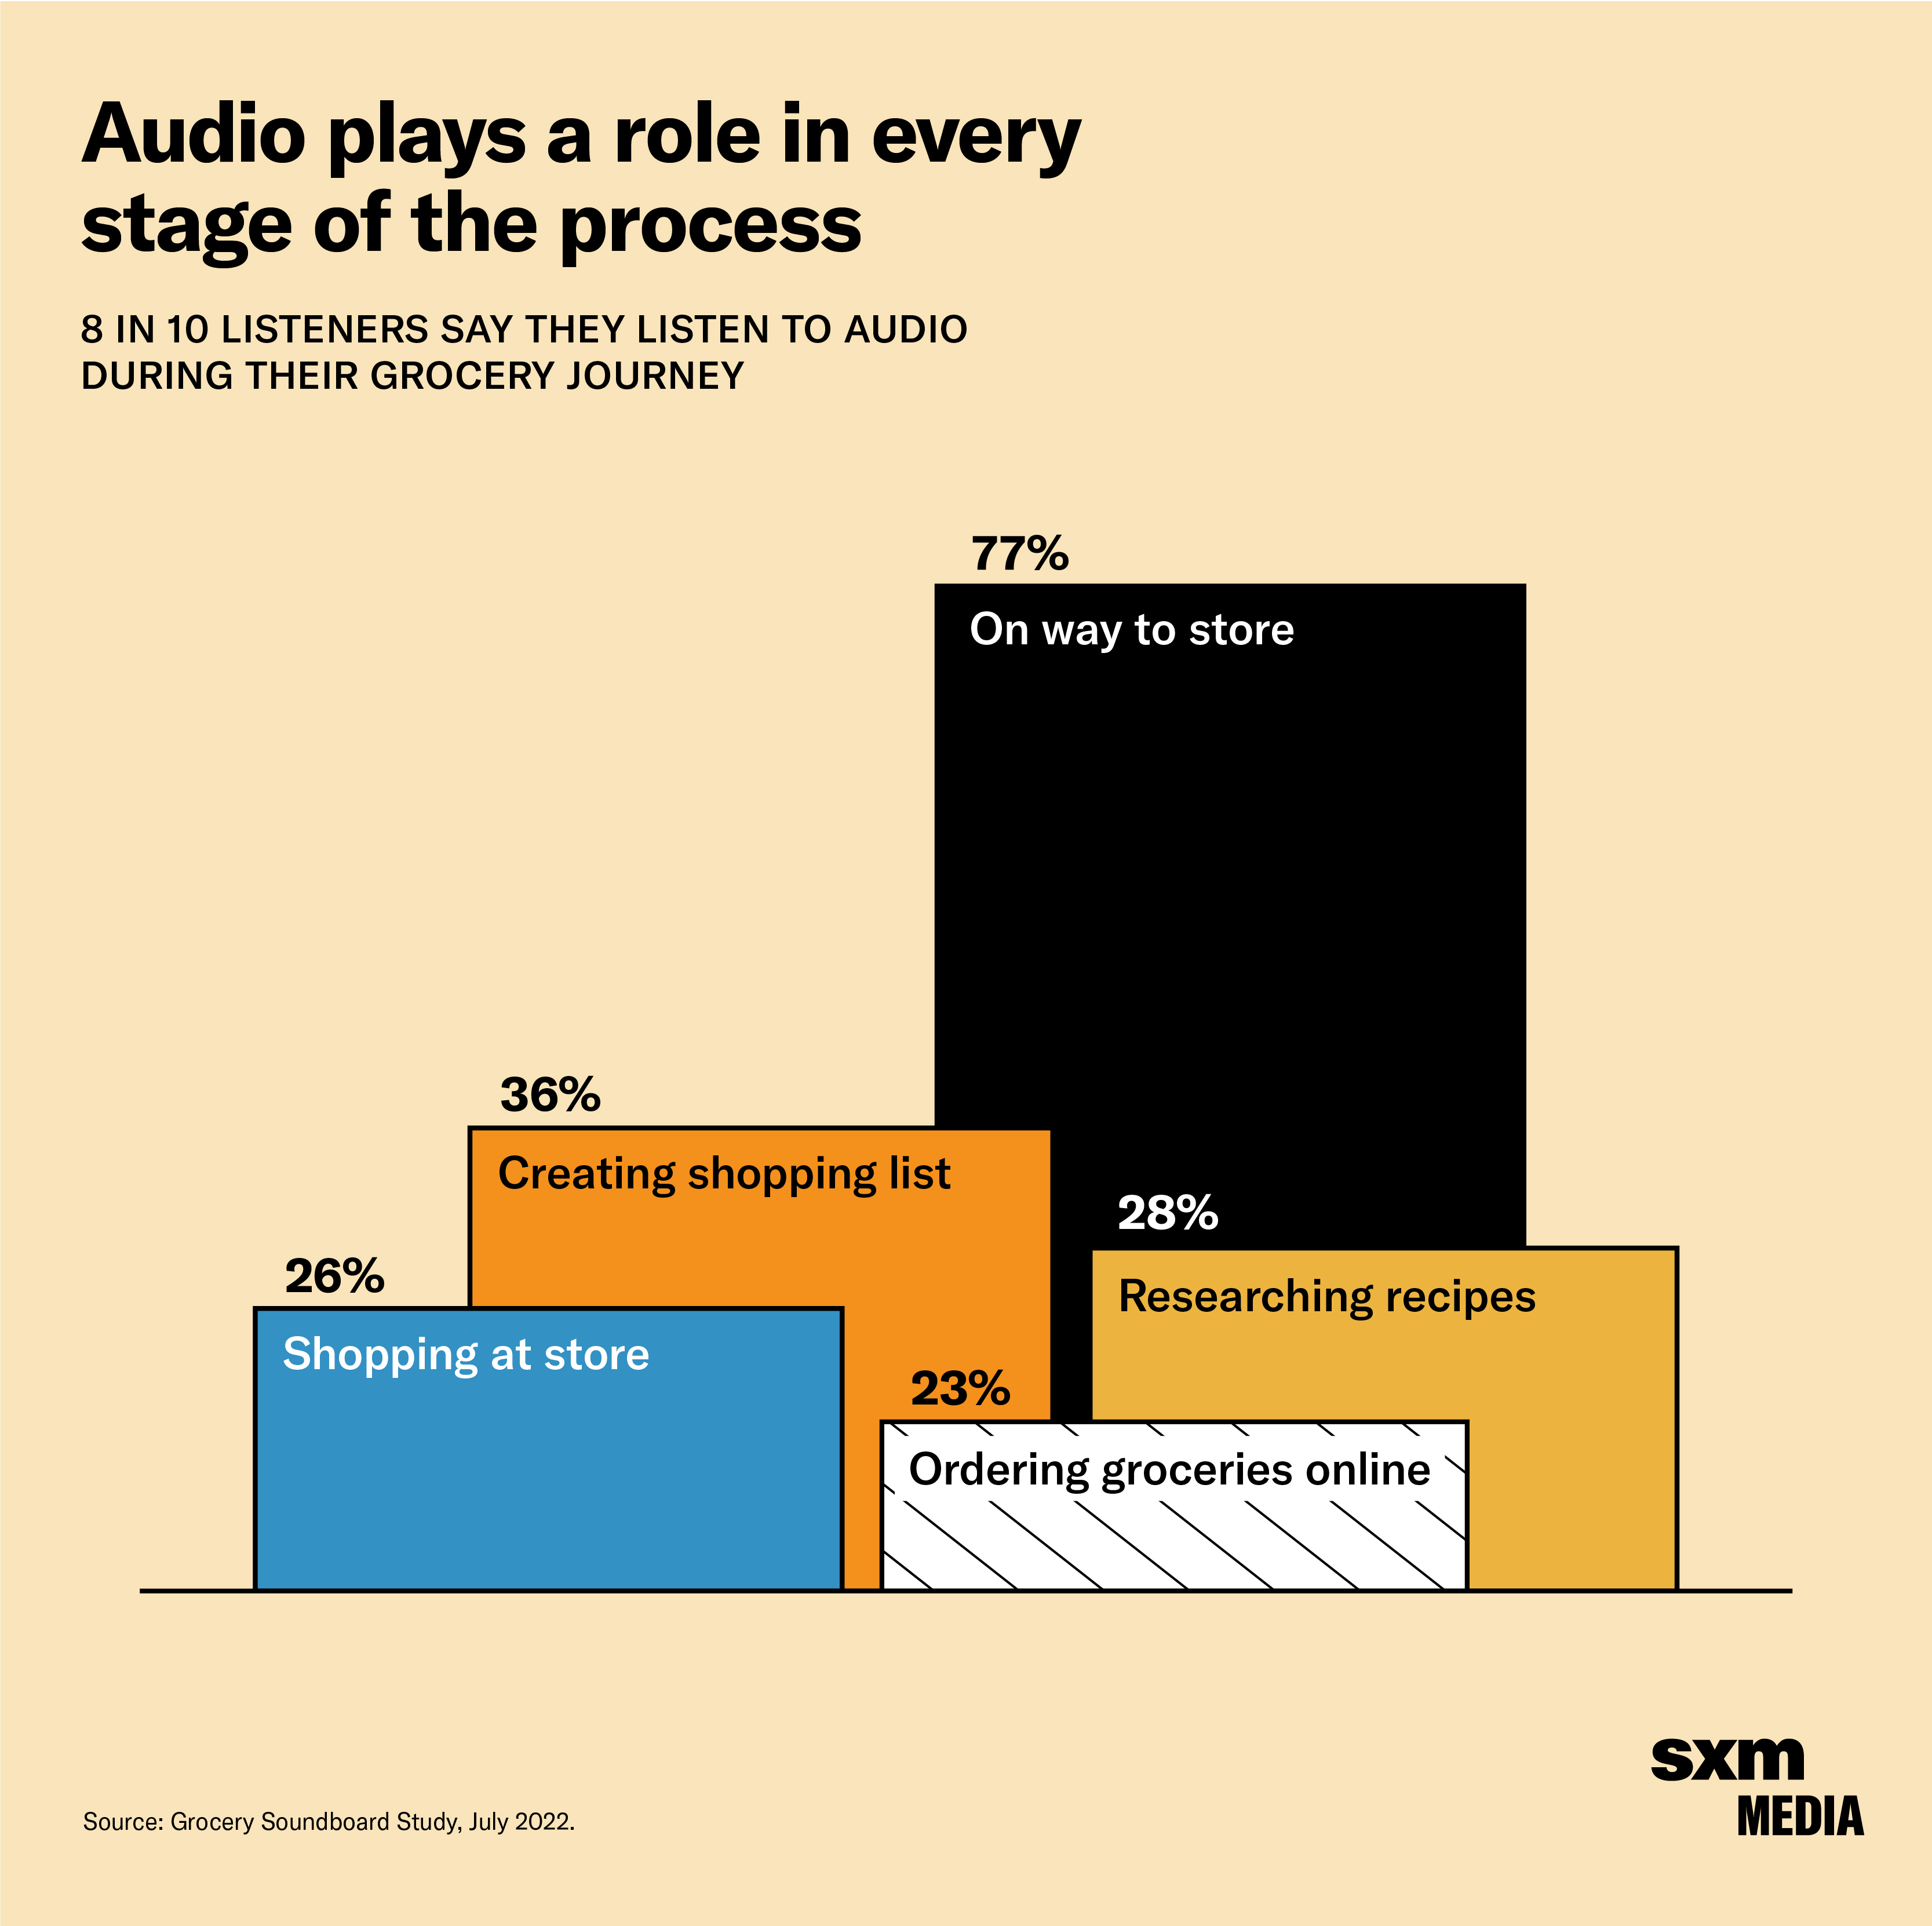 Audio plays a role in every stage of the process image